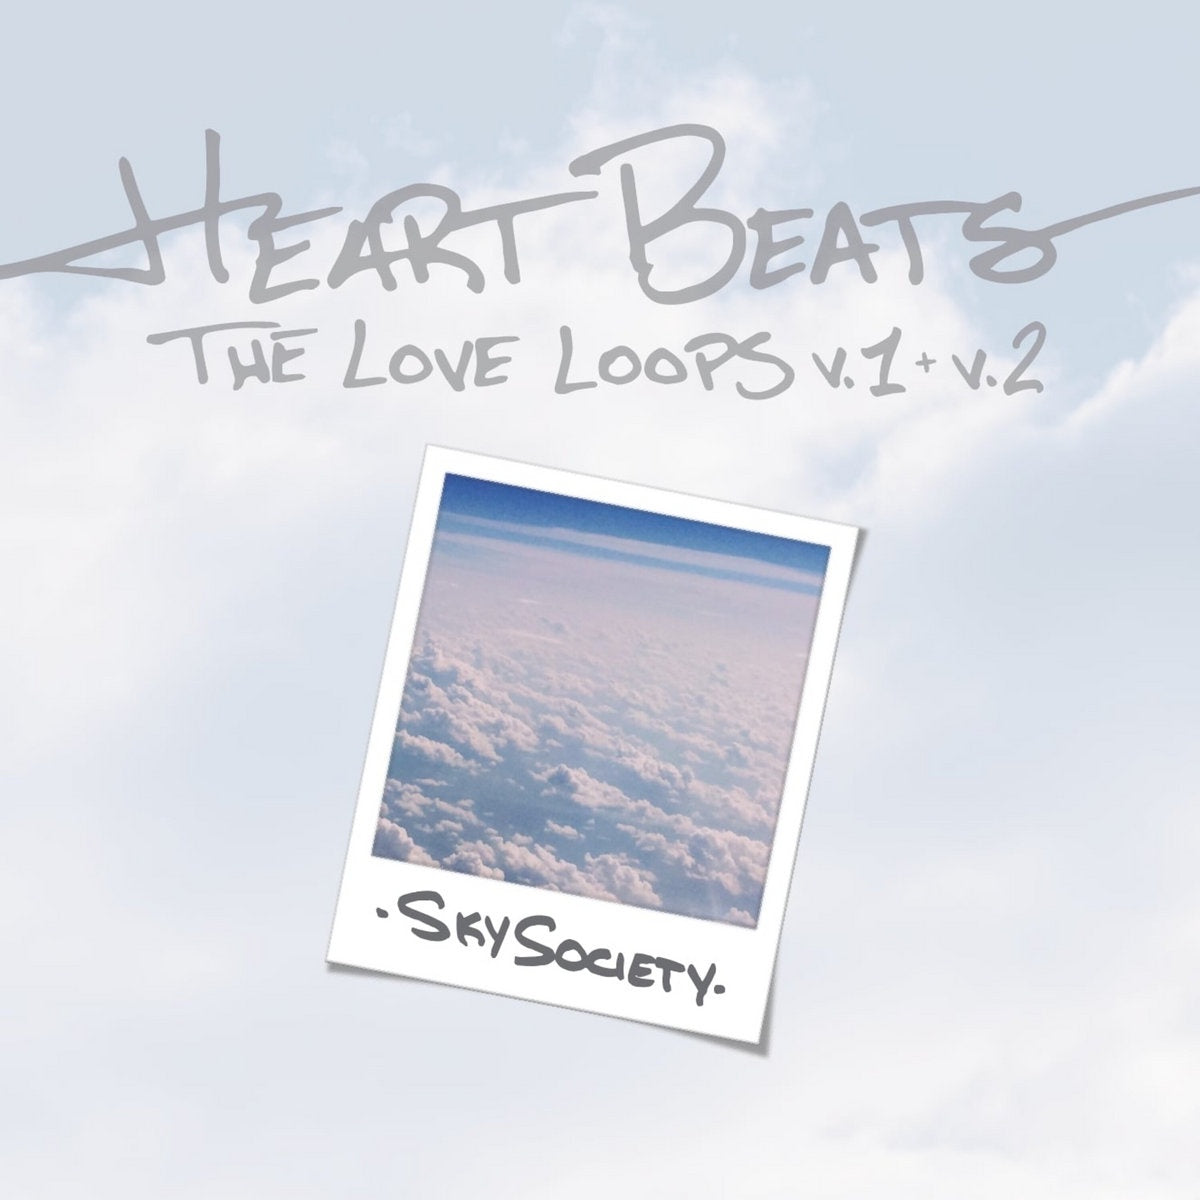 Sky Society - Heart Beats: The Love Loops Vol. 1 & 2  - New LP Record 2022 Higher Frequency Vinyl - Instrumental Hip Hop / Beats / House